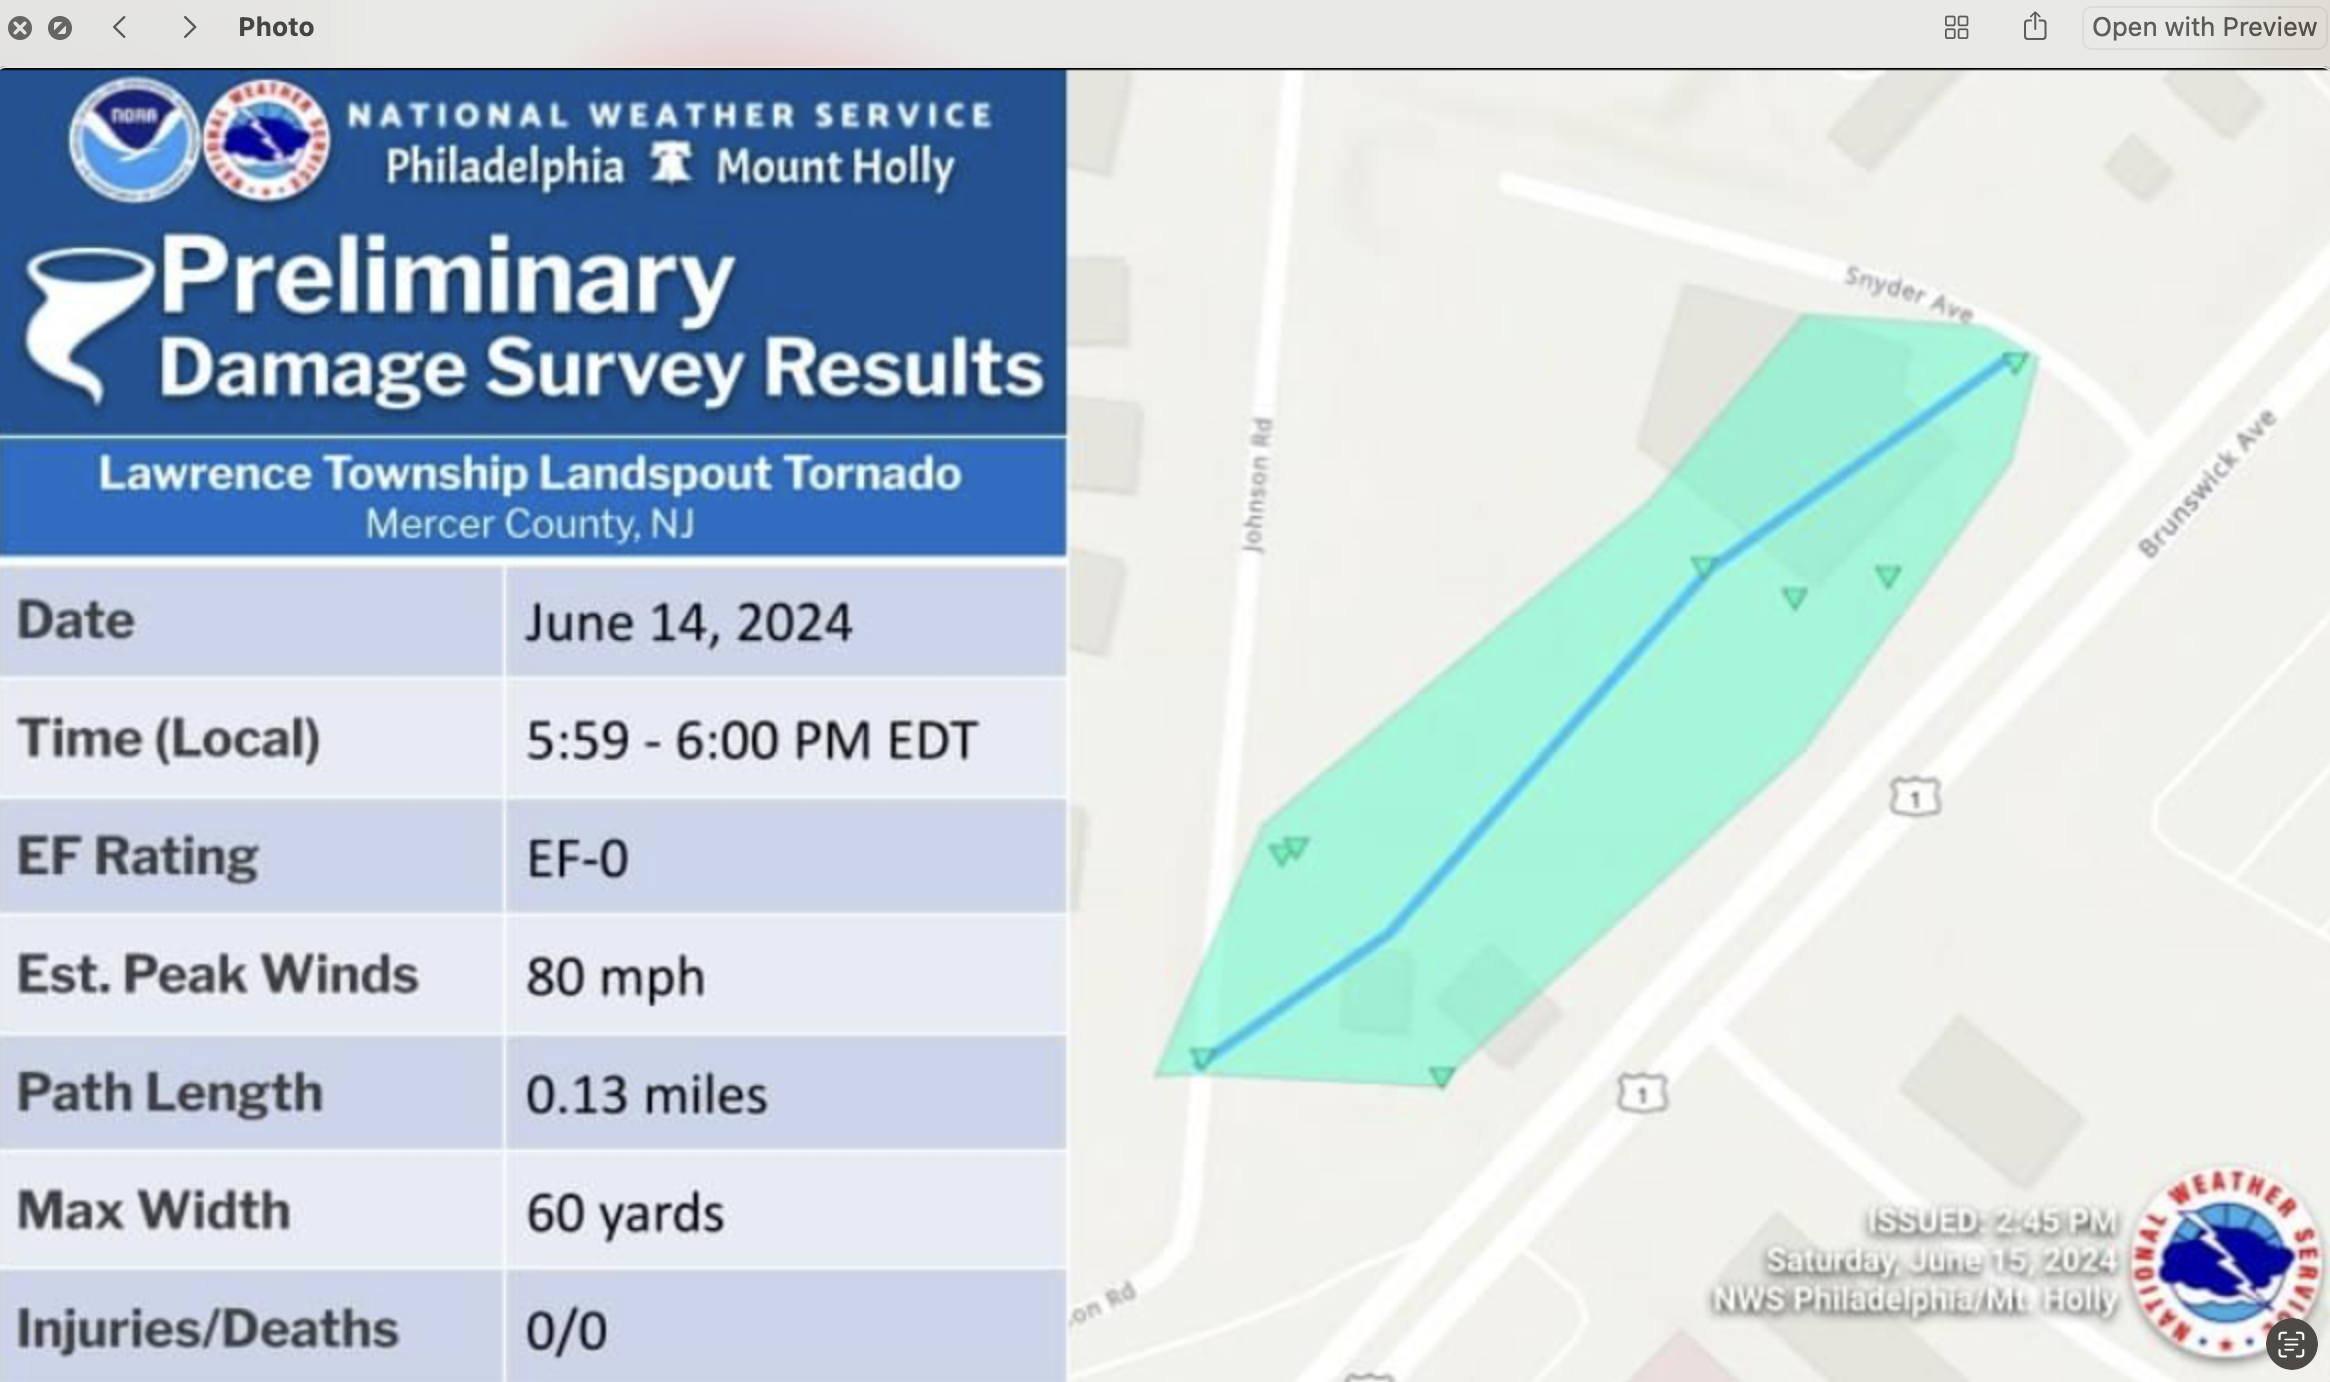 National Weather Service survey report for the EF-0 tornado in Lawrence Township on June 14th.